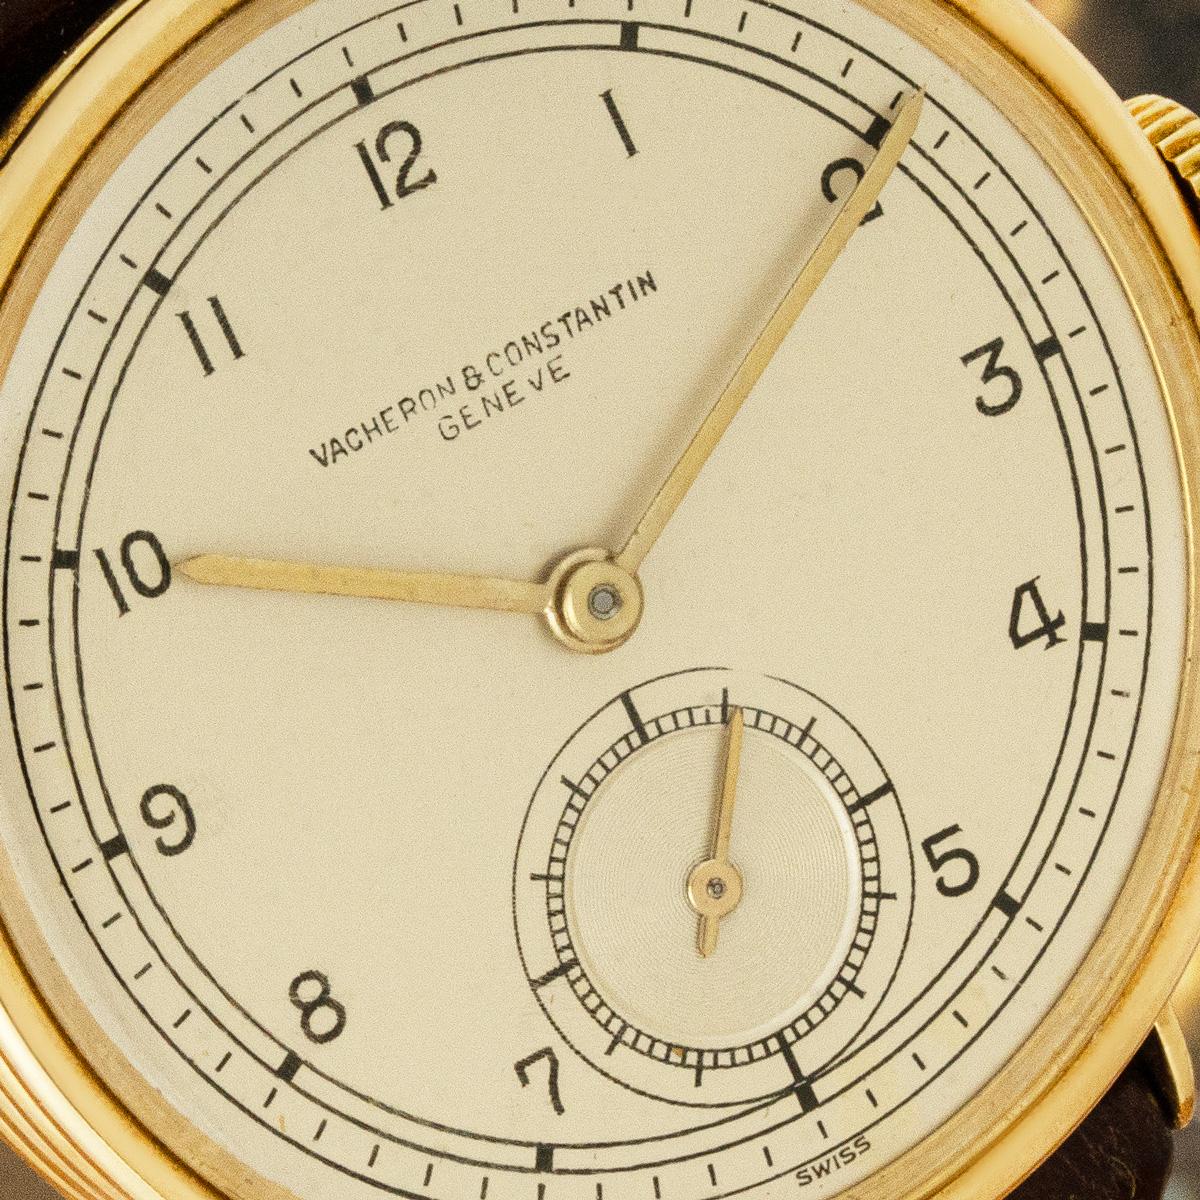 Vacheron Constantin Dress Watch Vintage Yellow Gold 4071 In Excellent Condition For Sale In London, GB